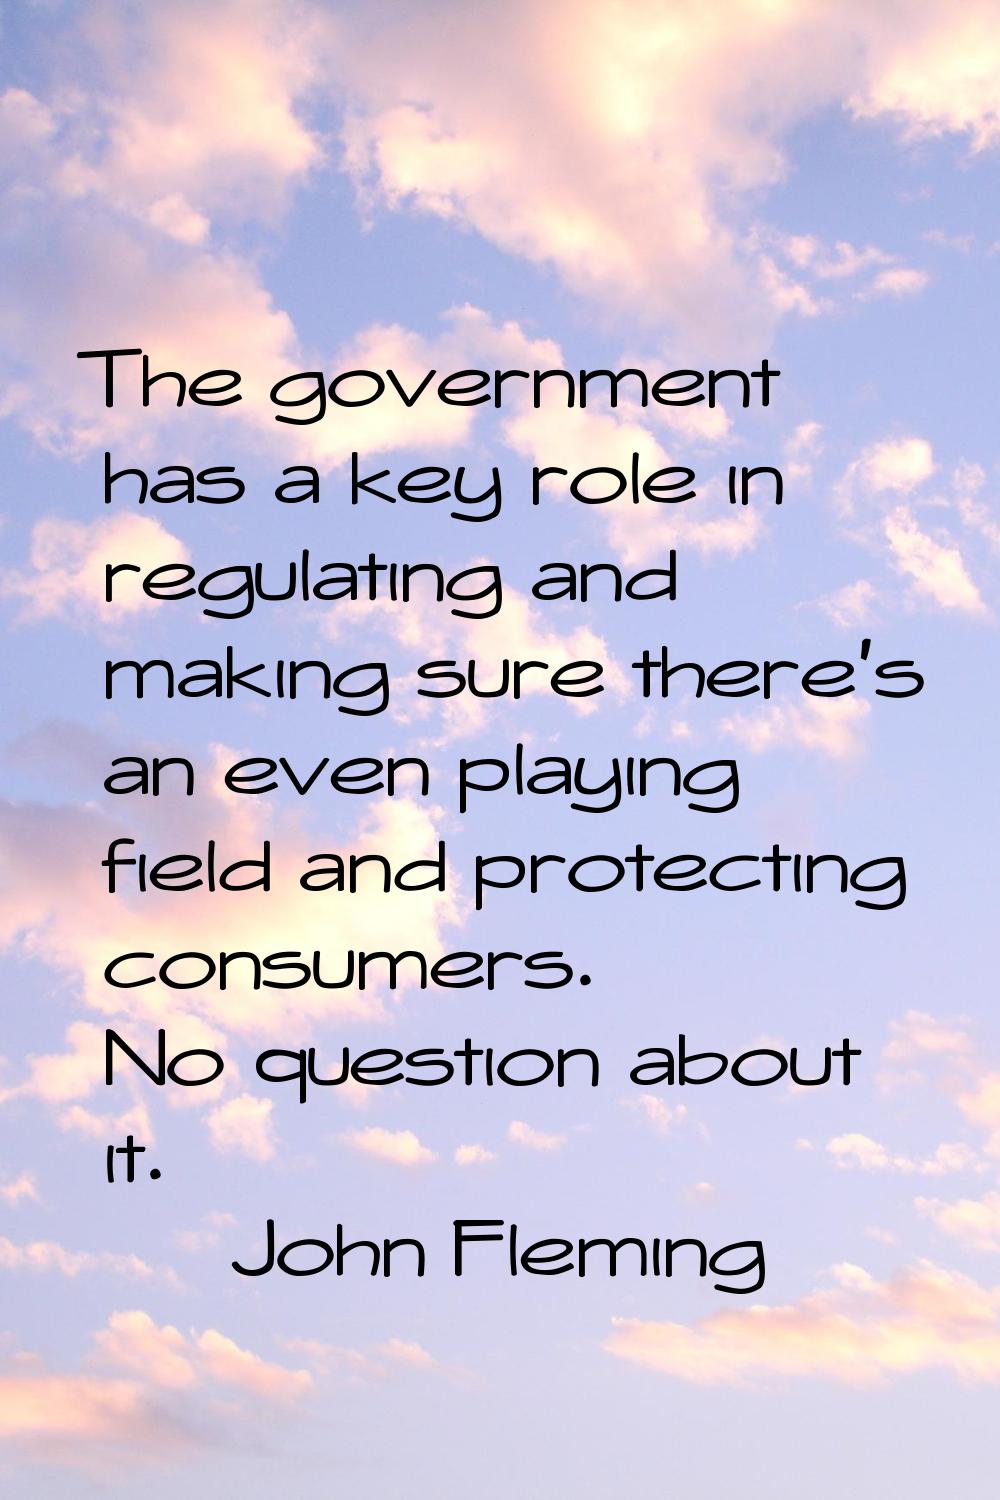 The government has a key role in regulating and making sure there's an even playing field and prote